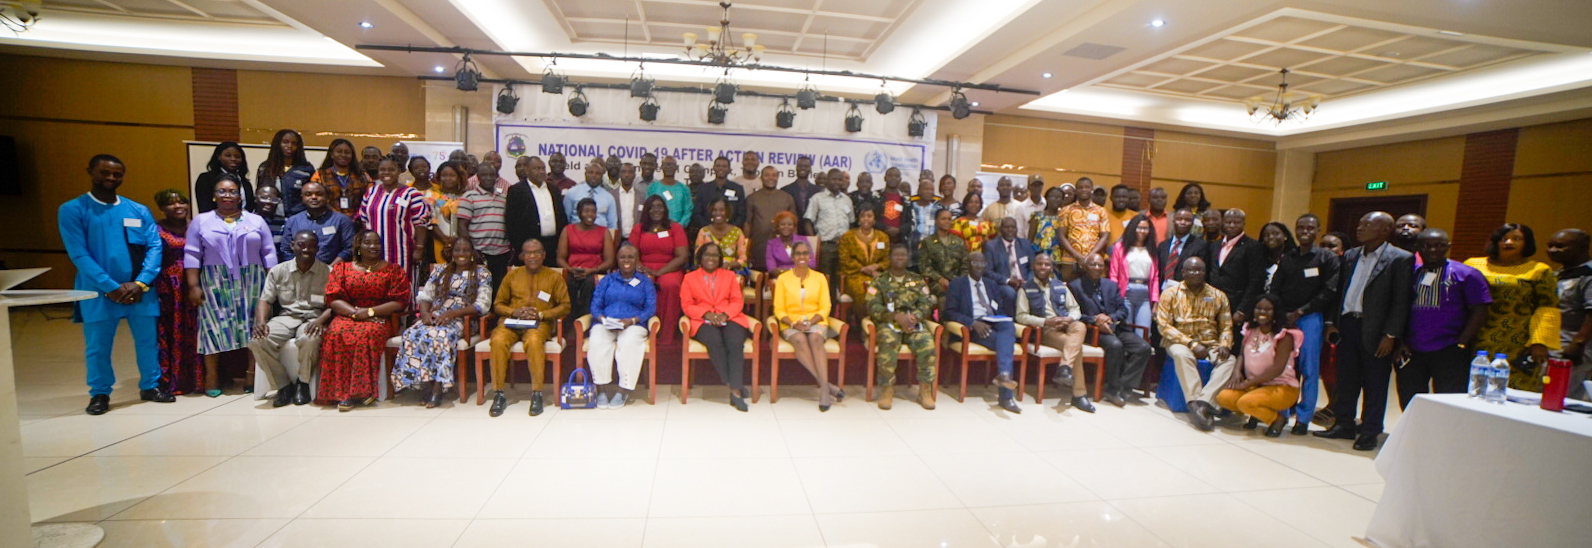 Group photo of participants at the AAR Meeting in Monrovia